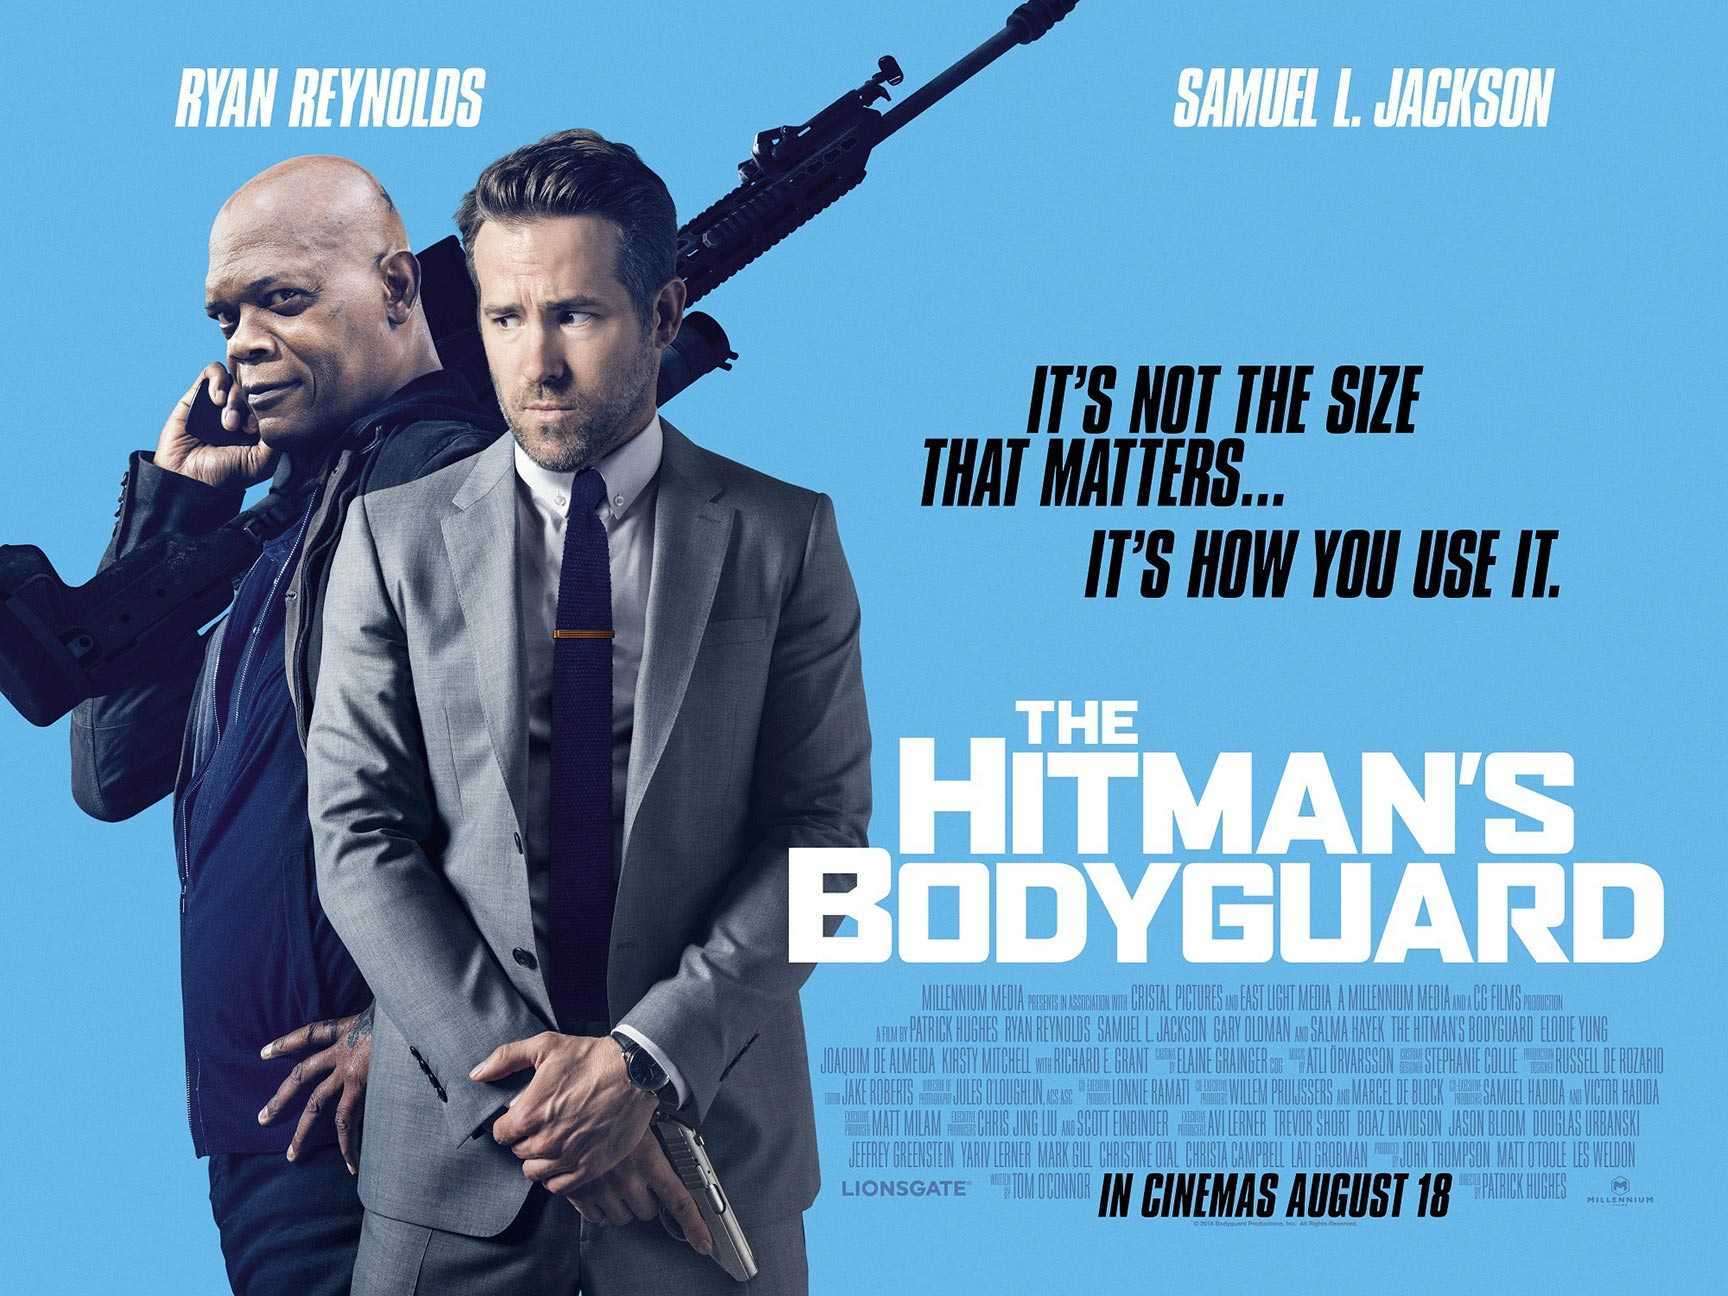 The Hitman’s Bodyguard movie review: Ryan Reynolds misses the comic bullet this time